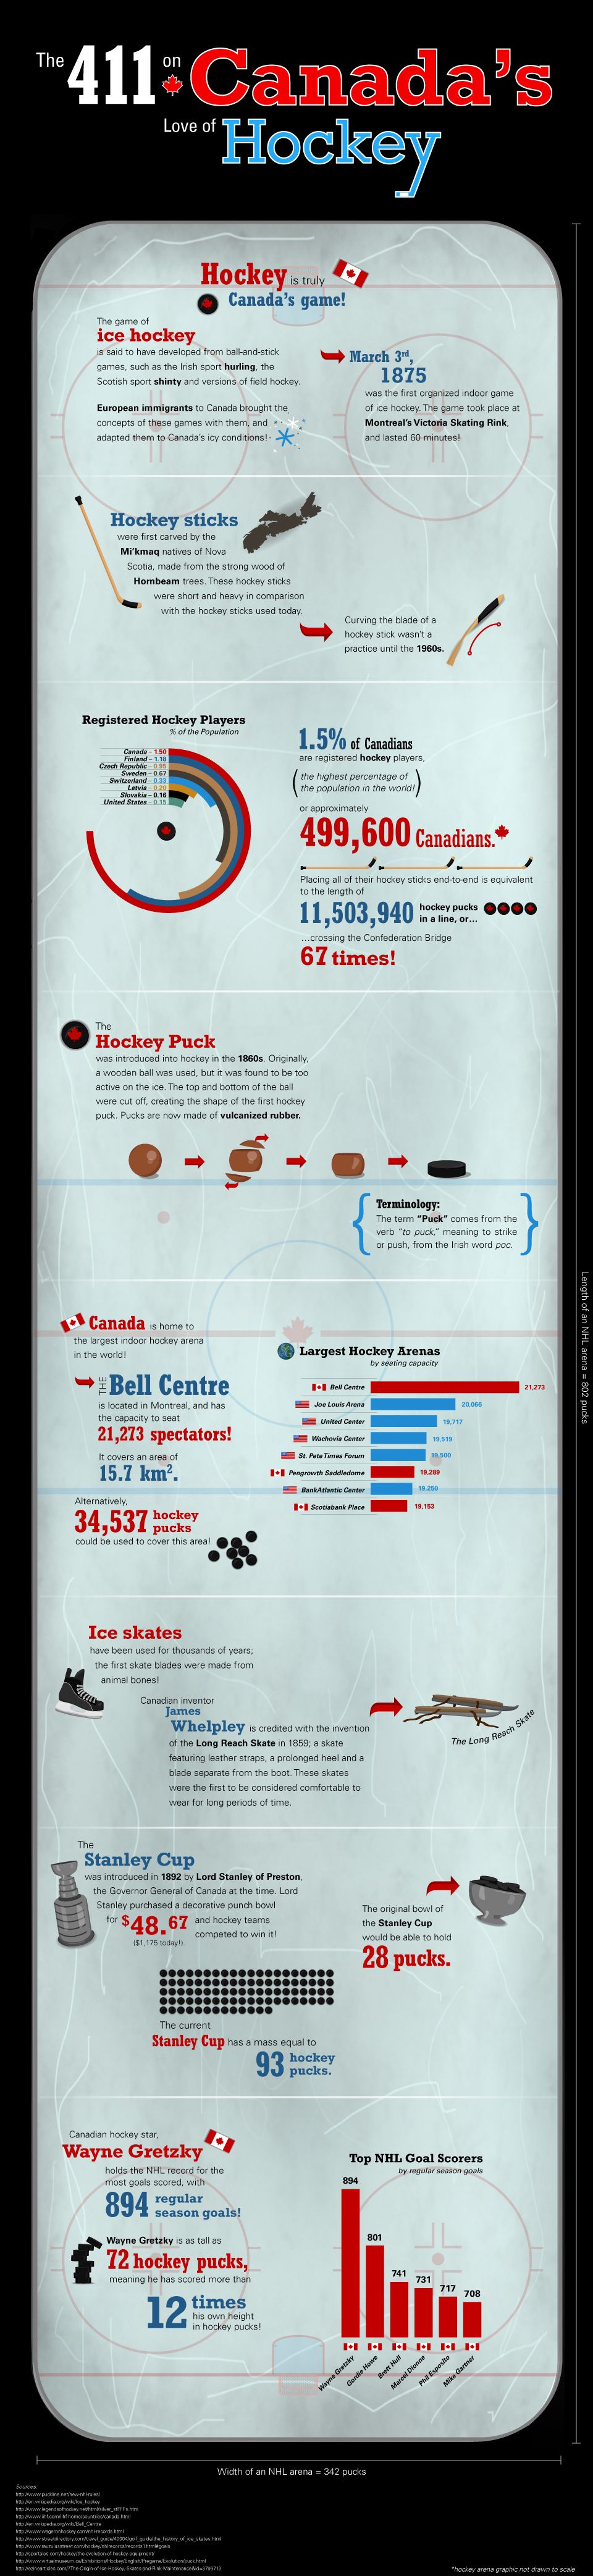 Facts About Hockey